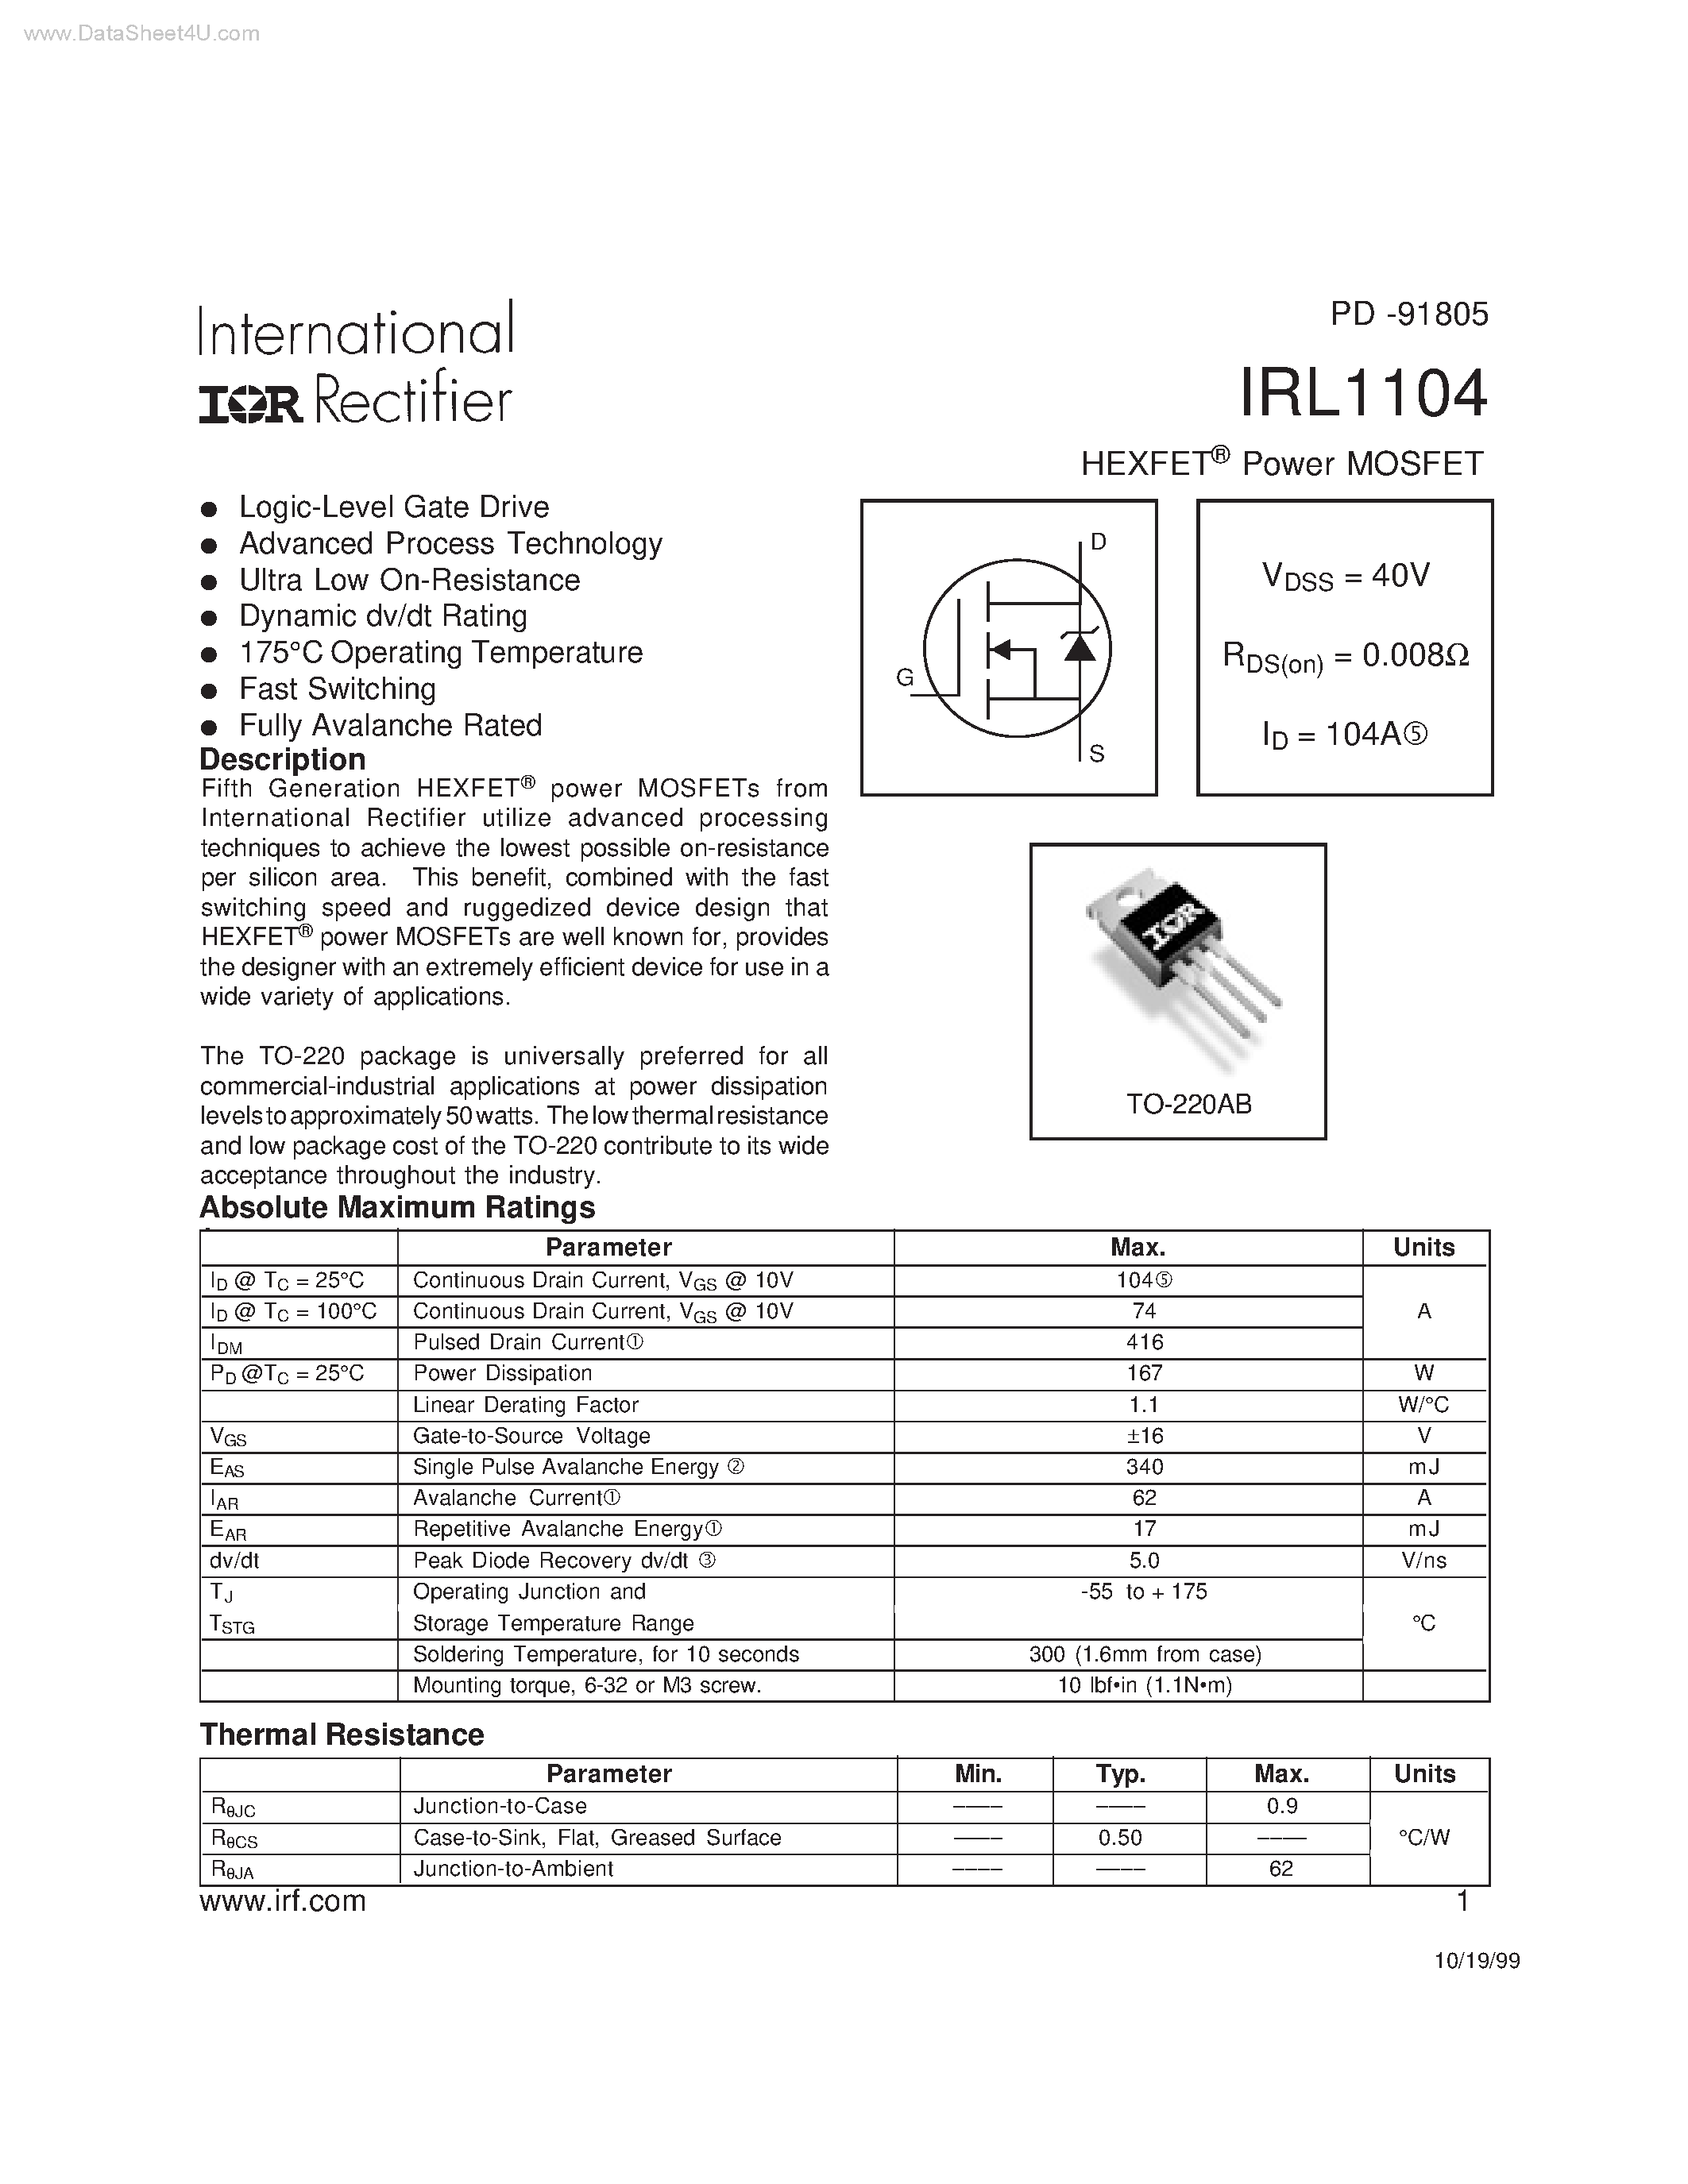 Даташит IRL1104-HEXFET Power MOSFET страница 1